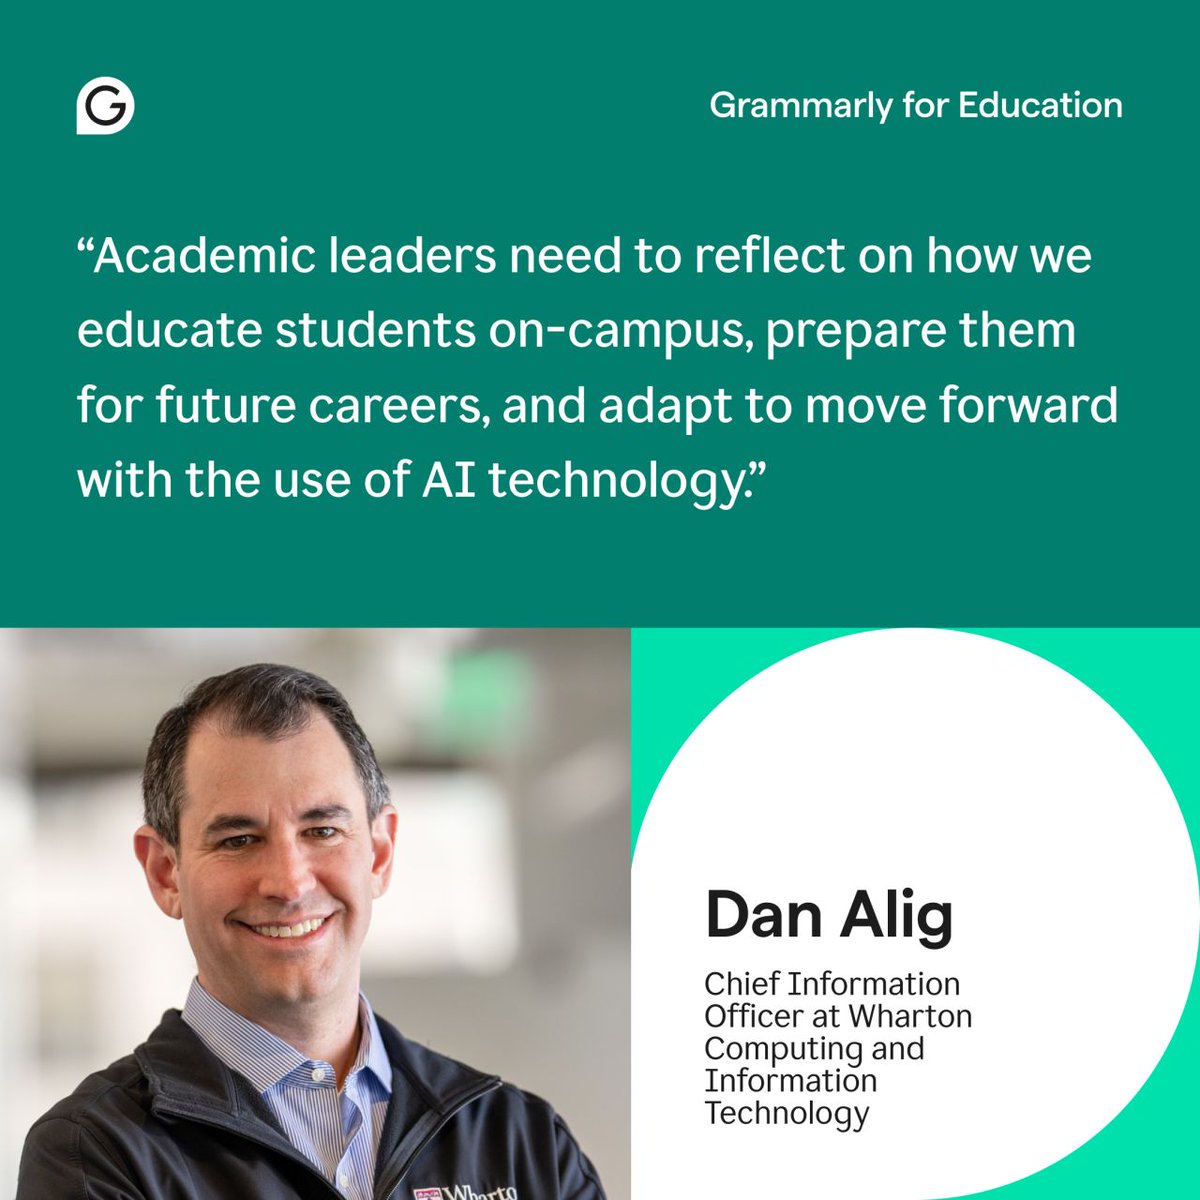 Your trusted AI writing partner for both students and educators. 🤝 At @wharton, CIO Dan Alig champions Grammarly’s role in helping institutions prepare students with the tools they need to succeed in an AI-driven workplace. Learn about our EDU offering: gram.ly/3QOMdwC